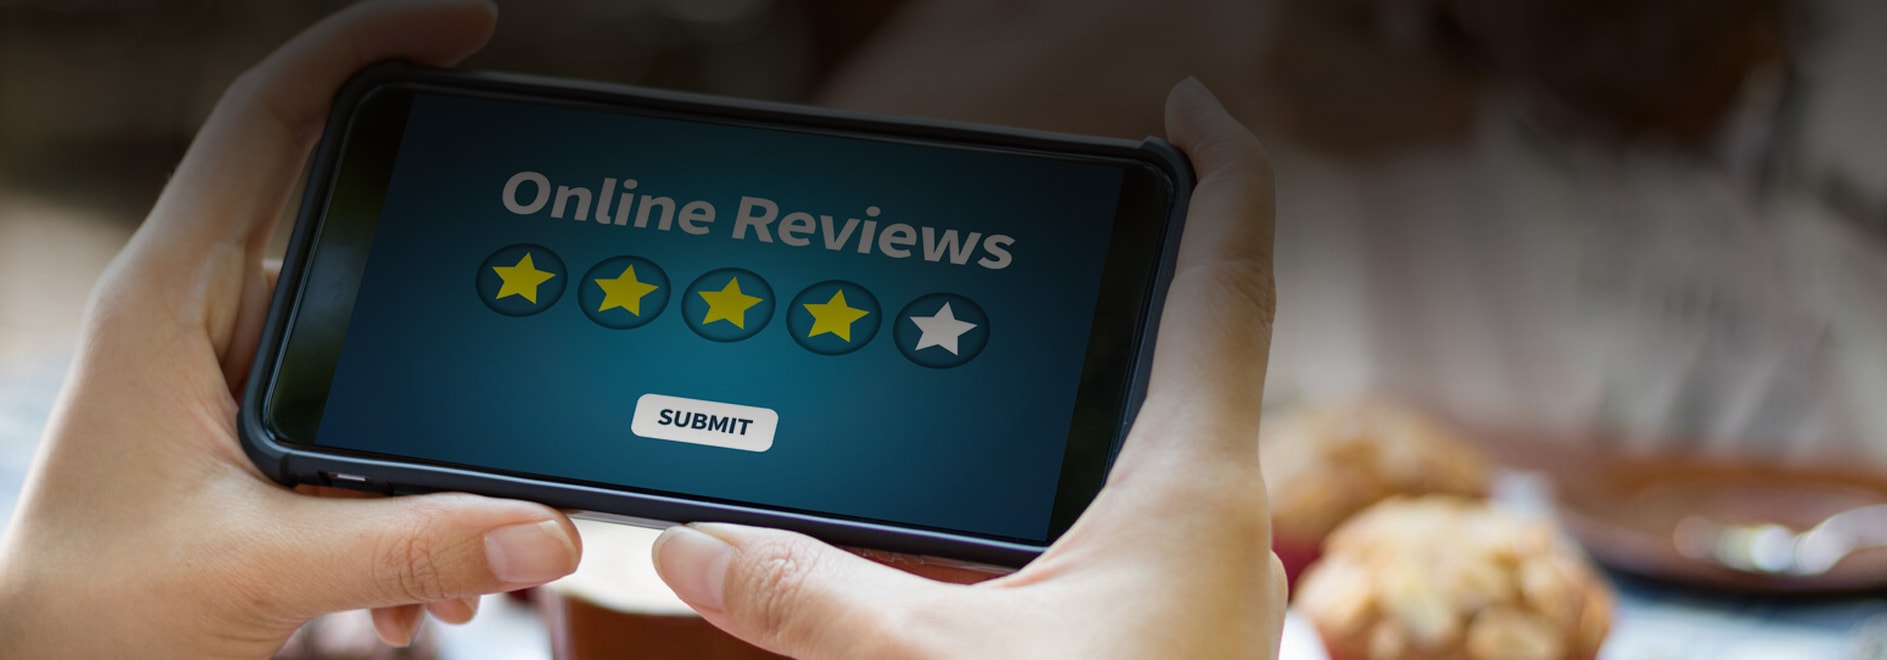 GETTING GOOGLE REVIEWS FOR YOUR BUSINESS